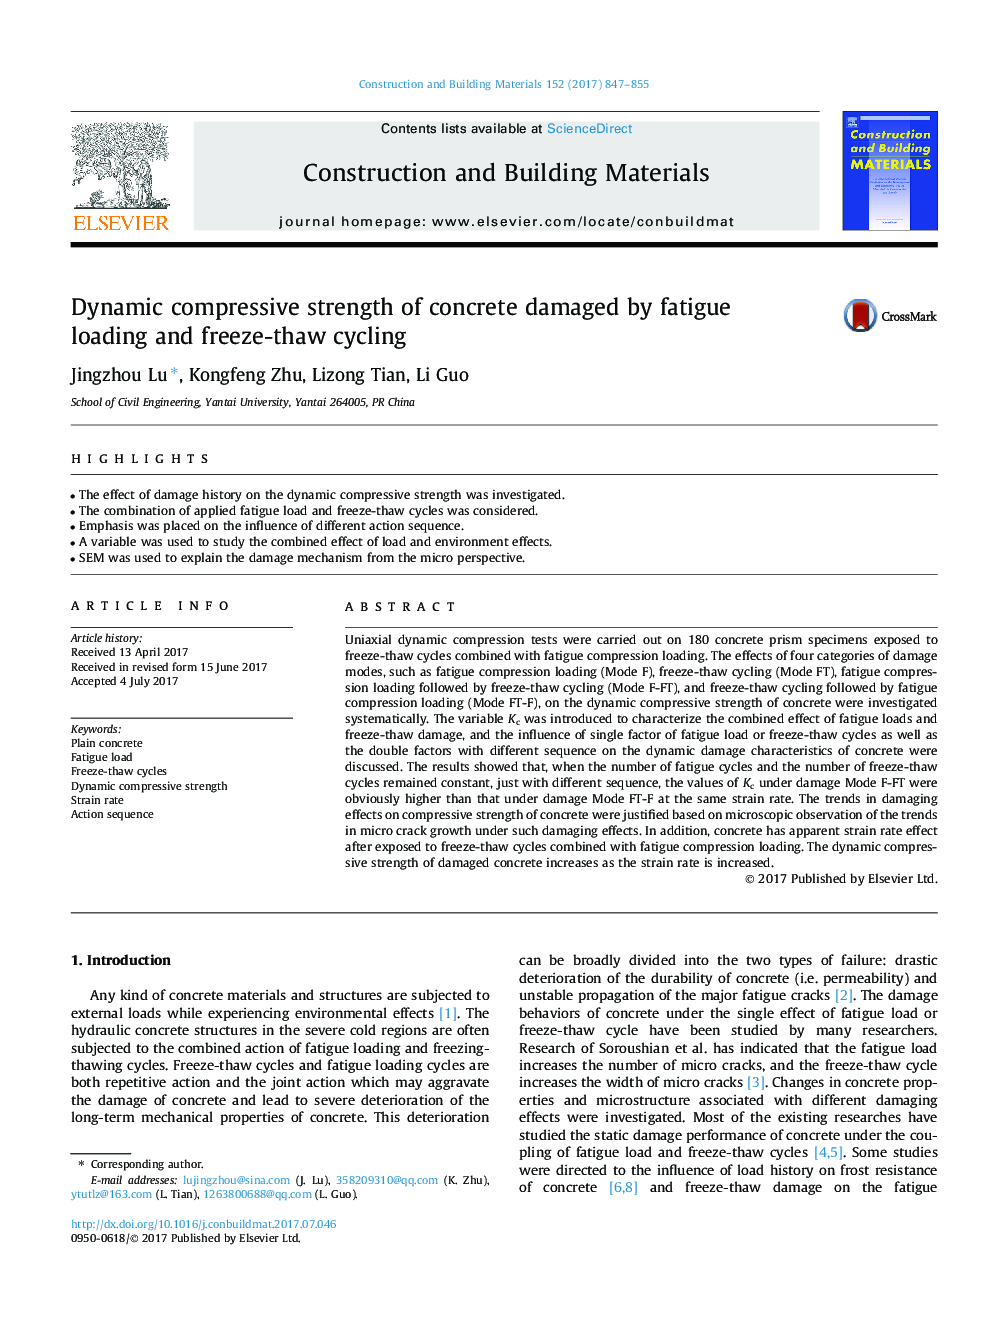 Dynamic compressive strength of concrete damaged by fatigue loading and freeze-thaw cycling